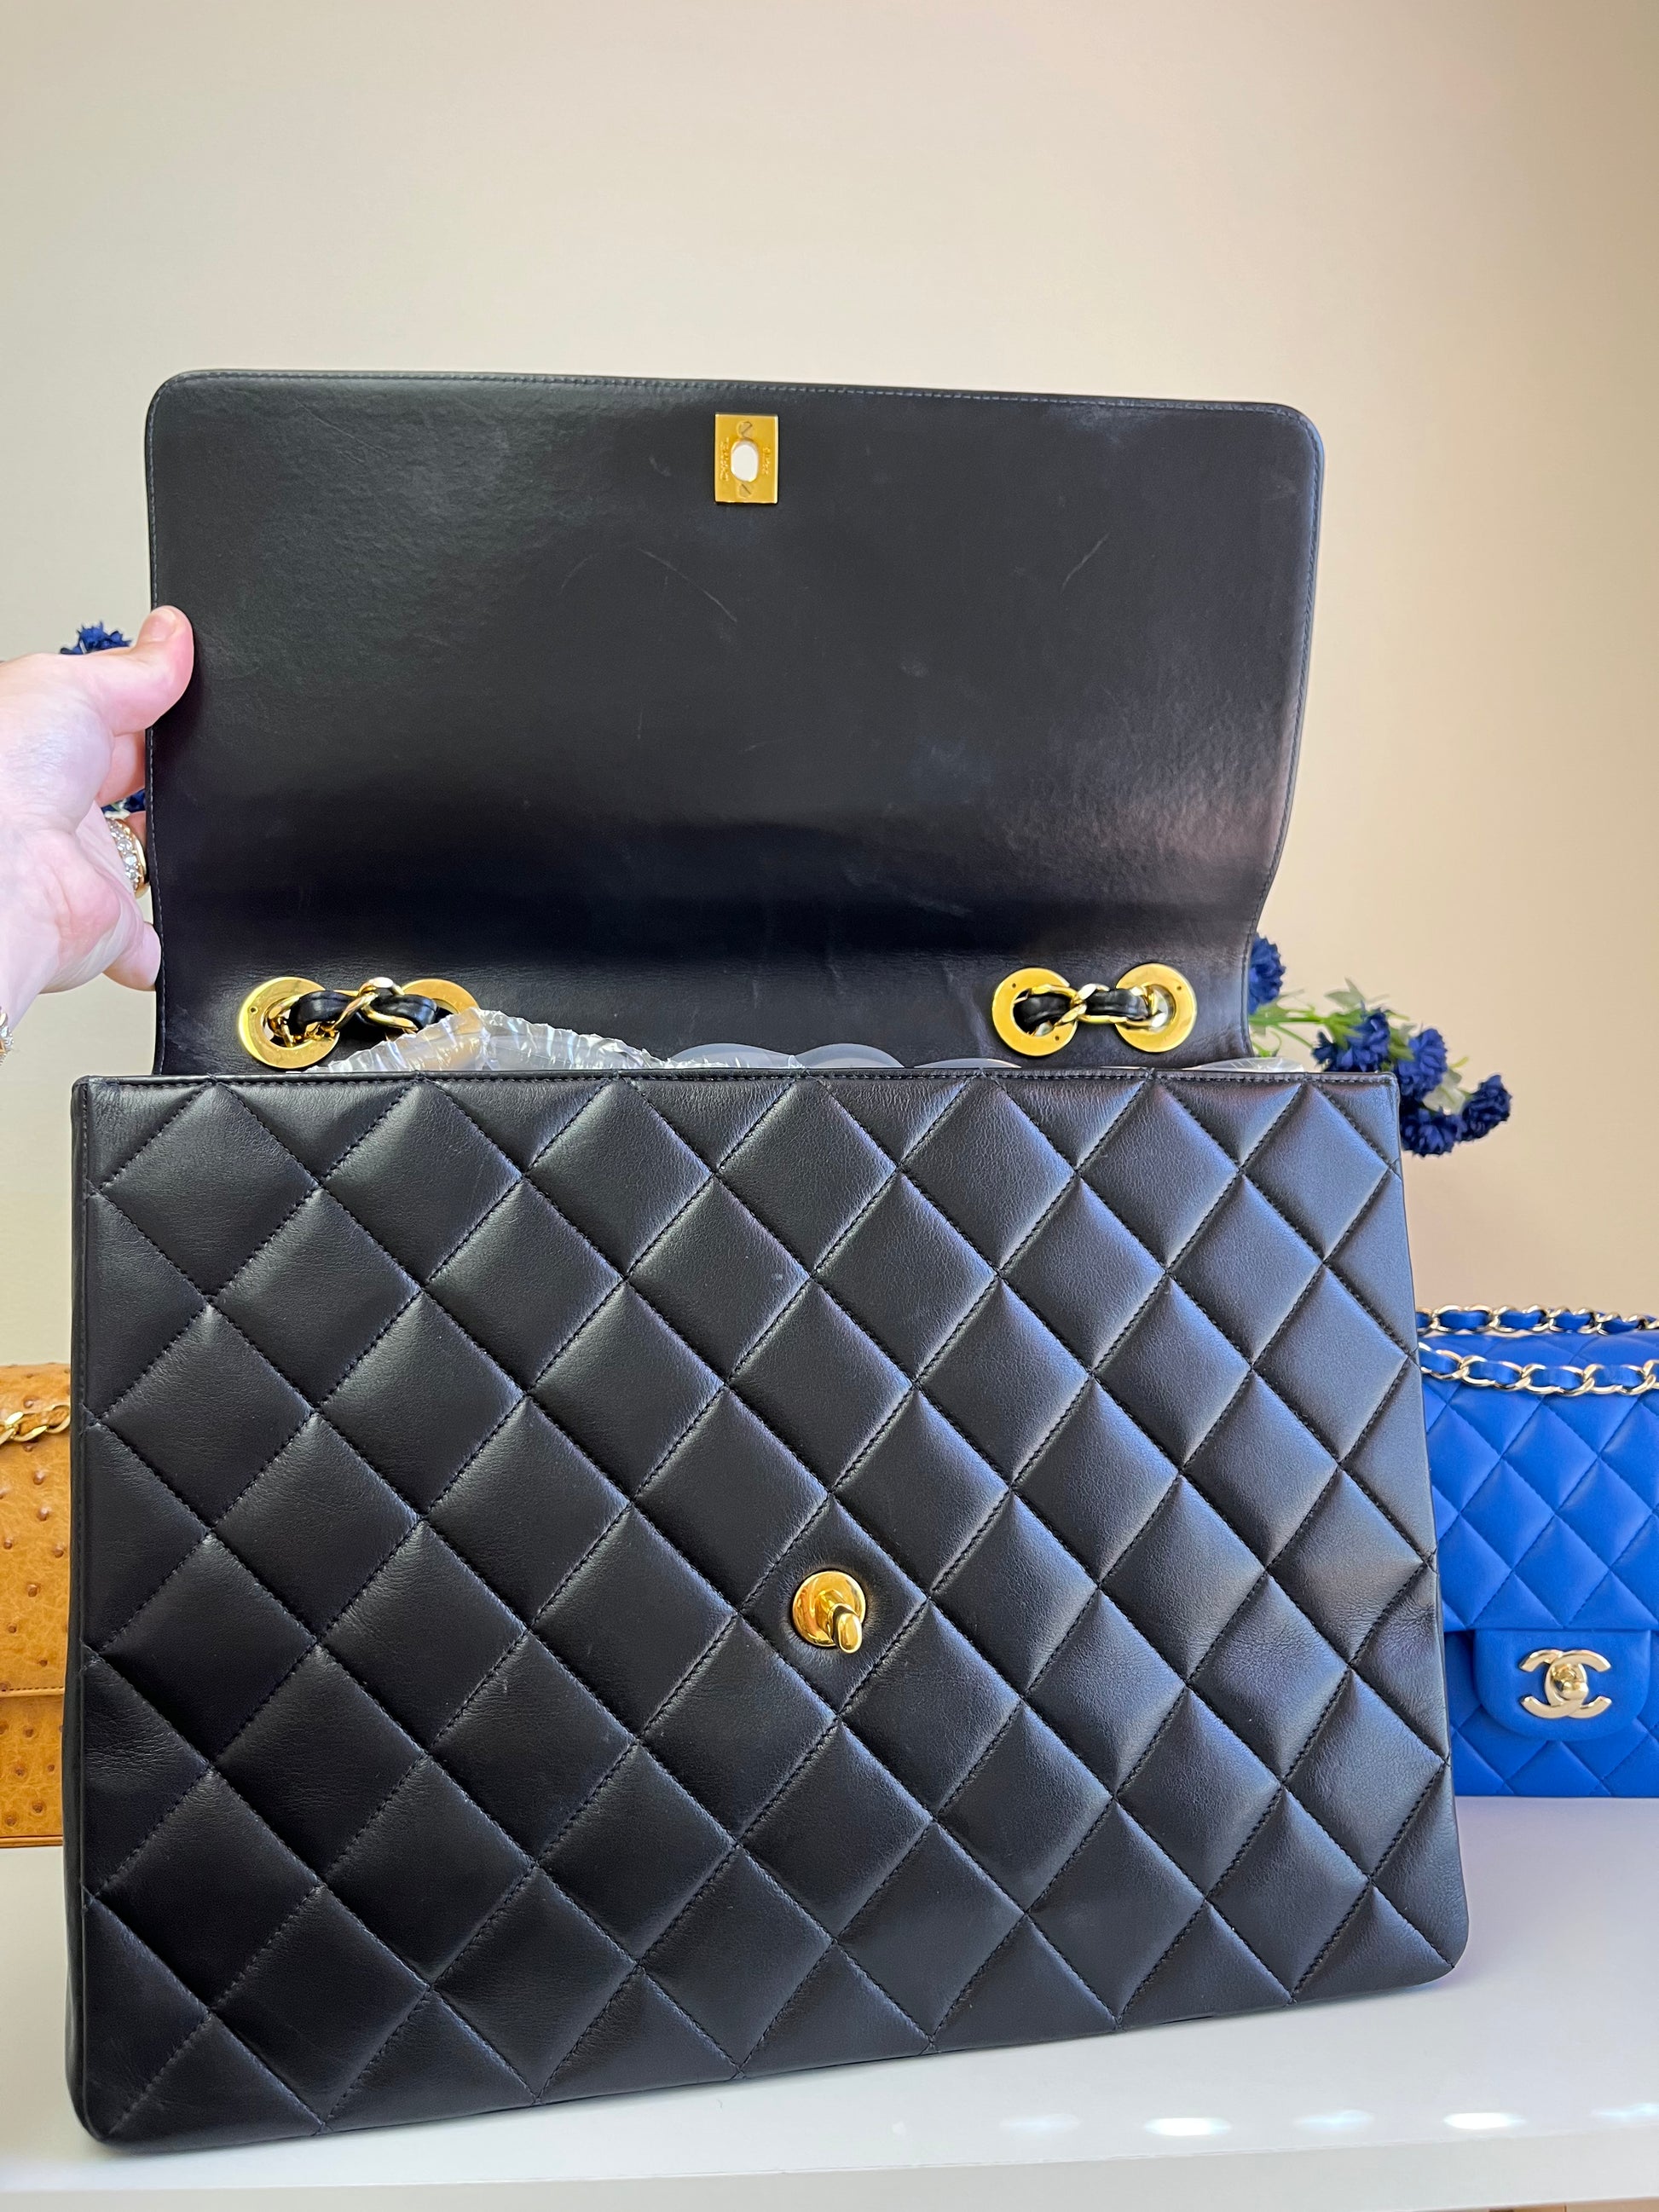 makeupbytiffanyd: Chanel Jumbo Classic Flap Review/Story and OOTD